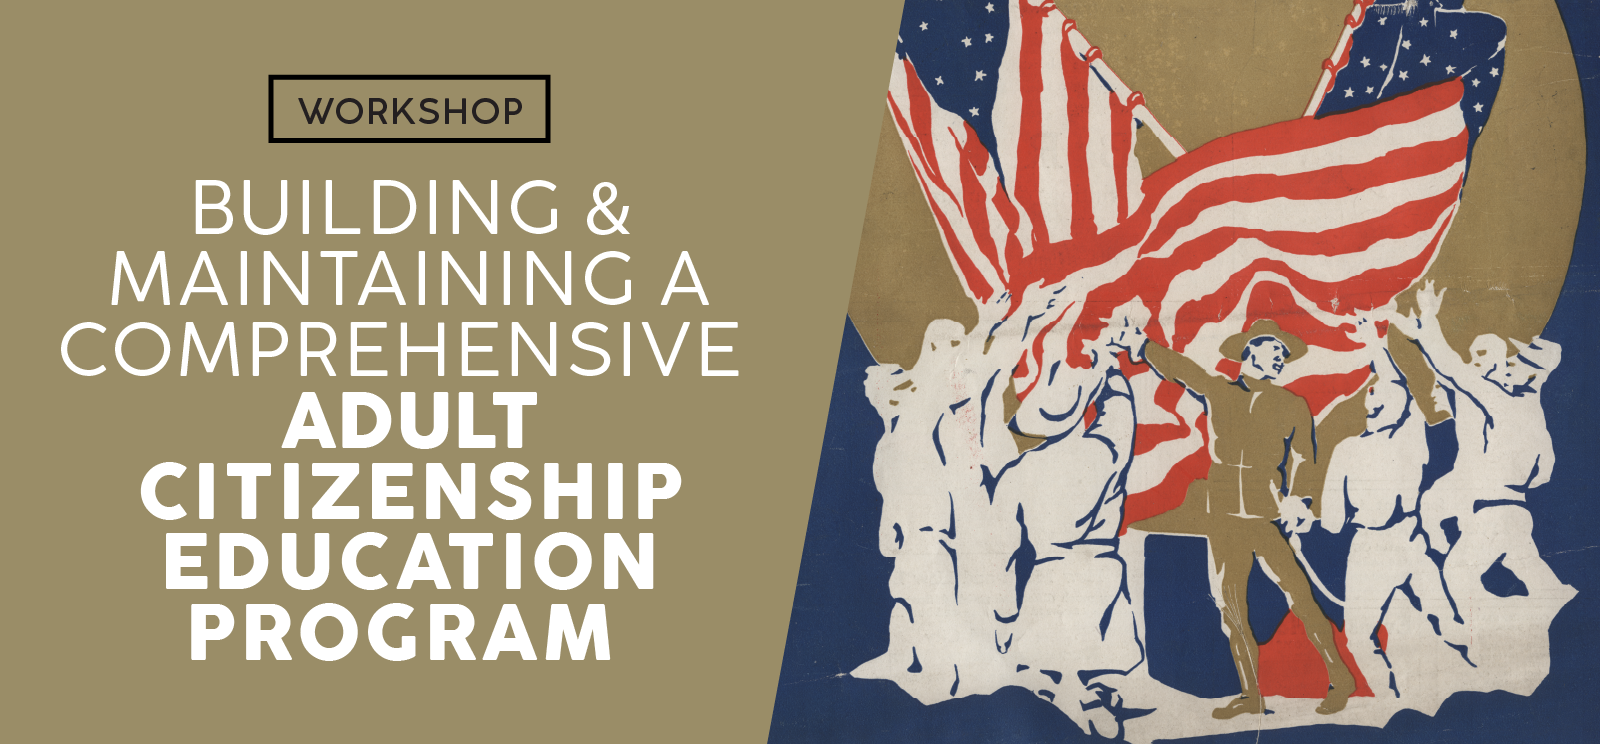 Image: Poster painting of several people raising their hands towards two U.S. flags. Text: Workshop / Building & Maintaining a Comprehensive Adult Citizenship Education Program